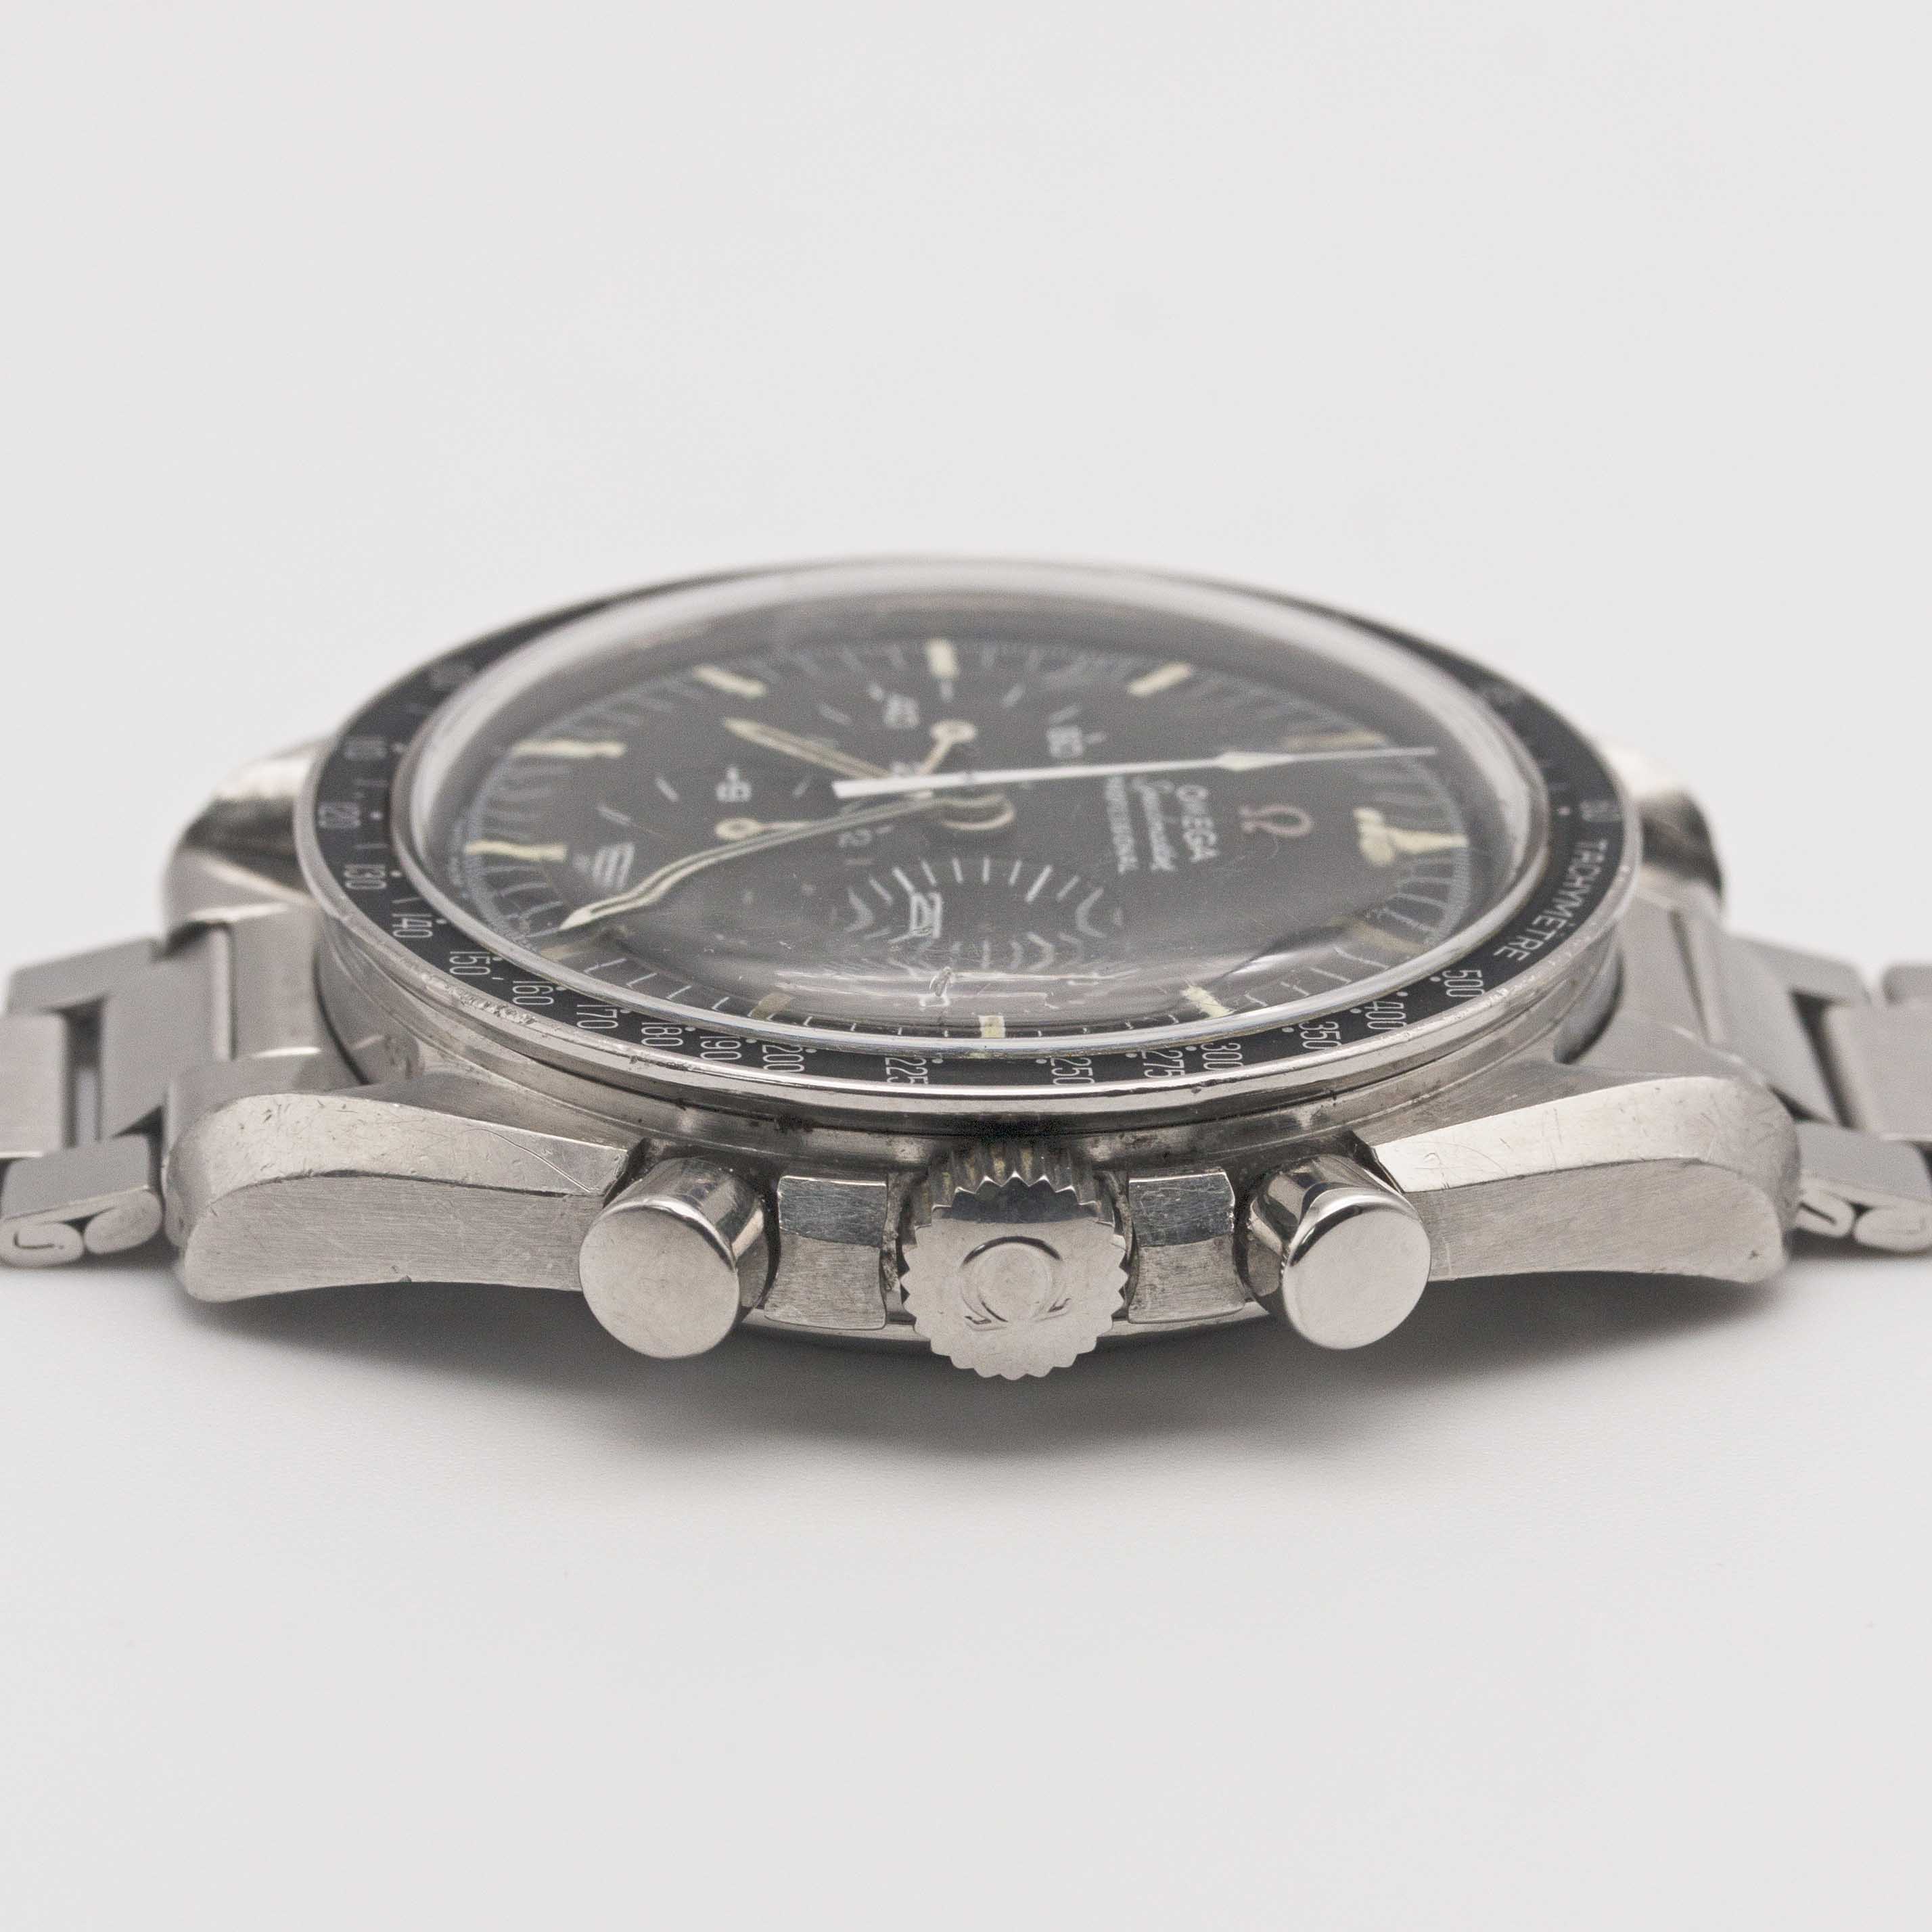 A GENTLEMAN'S STAINLESS STEEL OMEGA SPEEDMASTER PROFESSIONAL "PRE MOON" CHRONOGRAPH BRACELET WATCH - Image 9 of 11